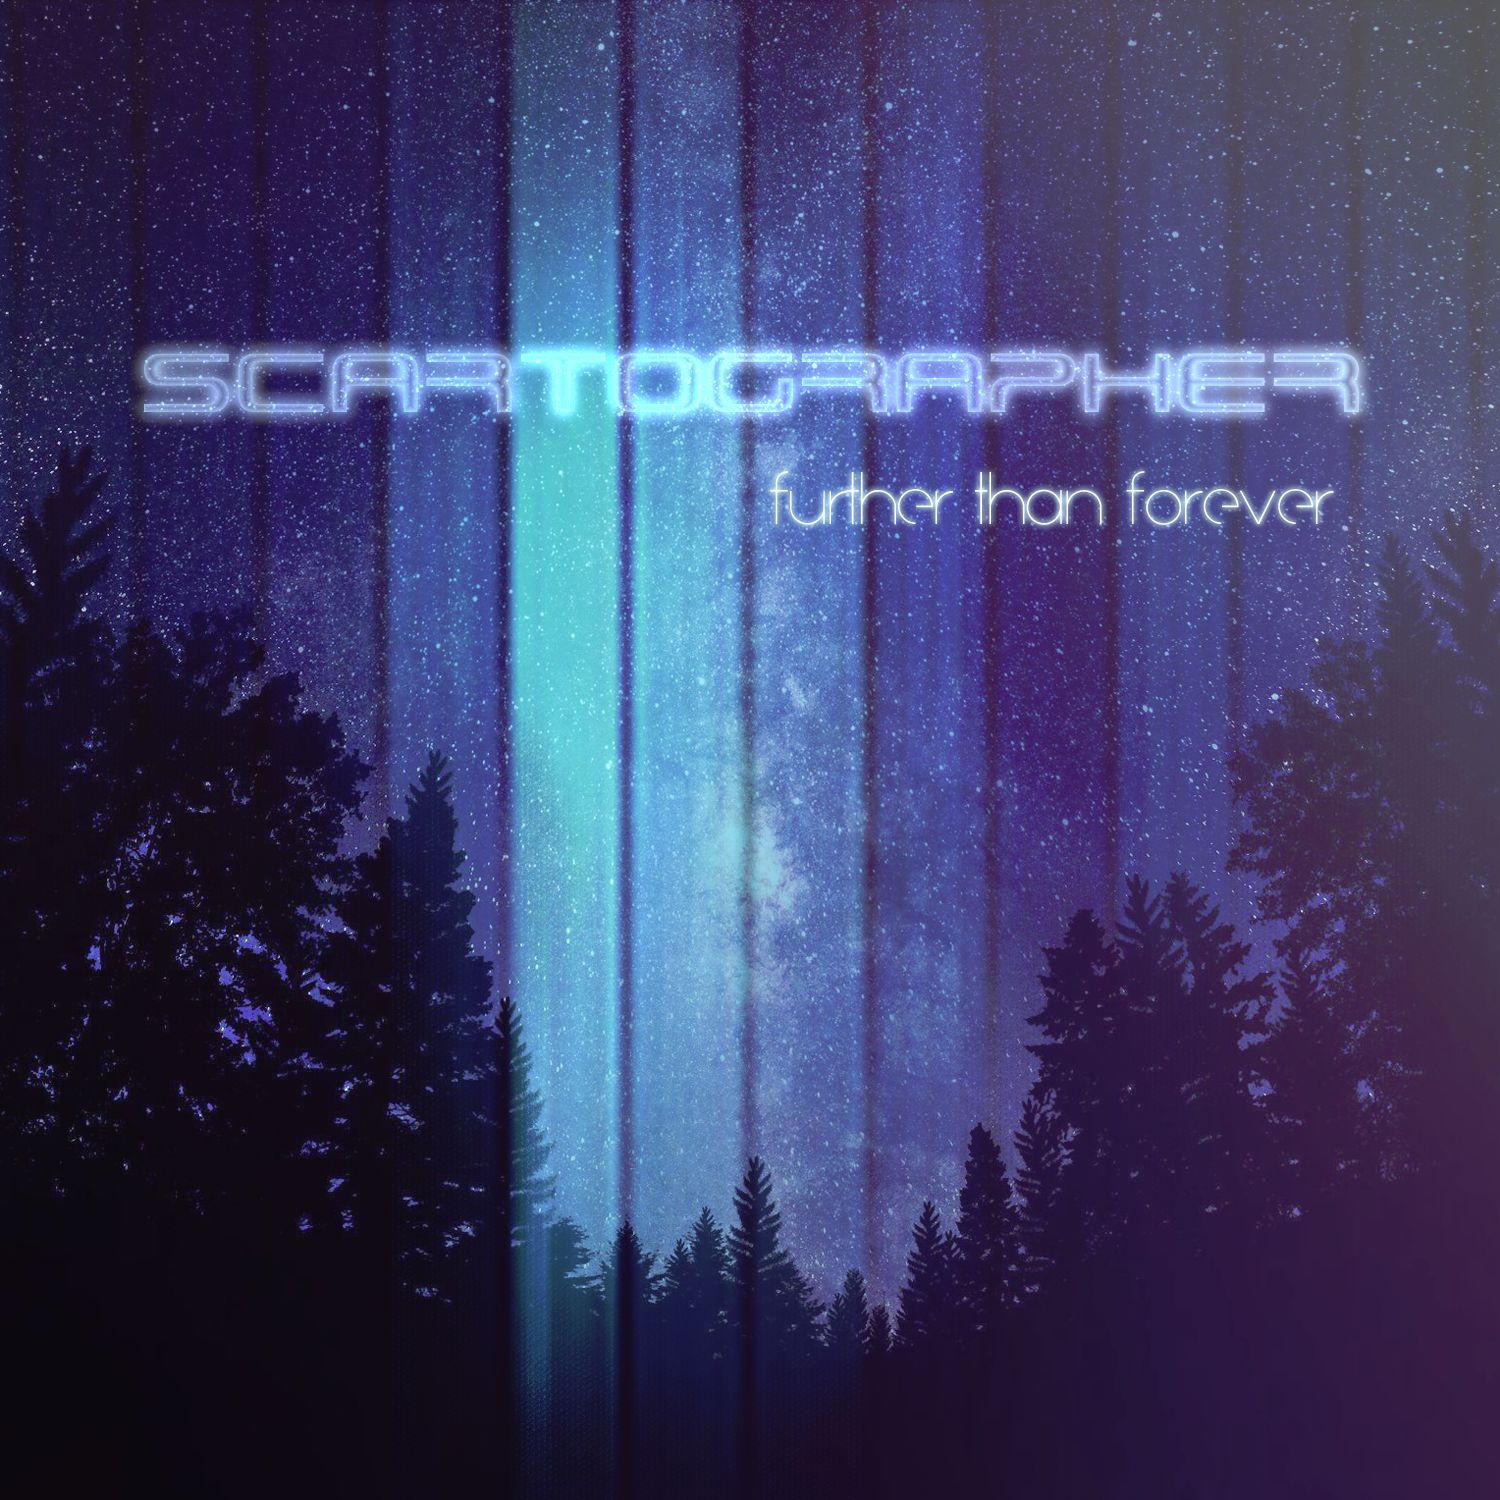 Download Scartographer - Further Than Forever